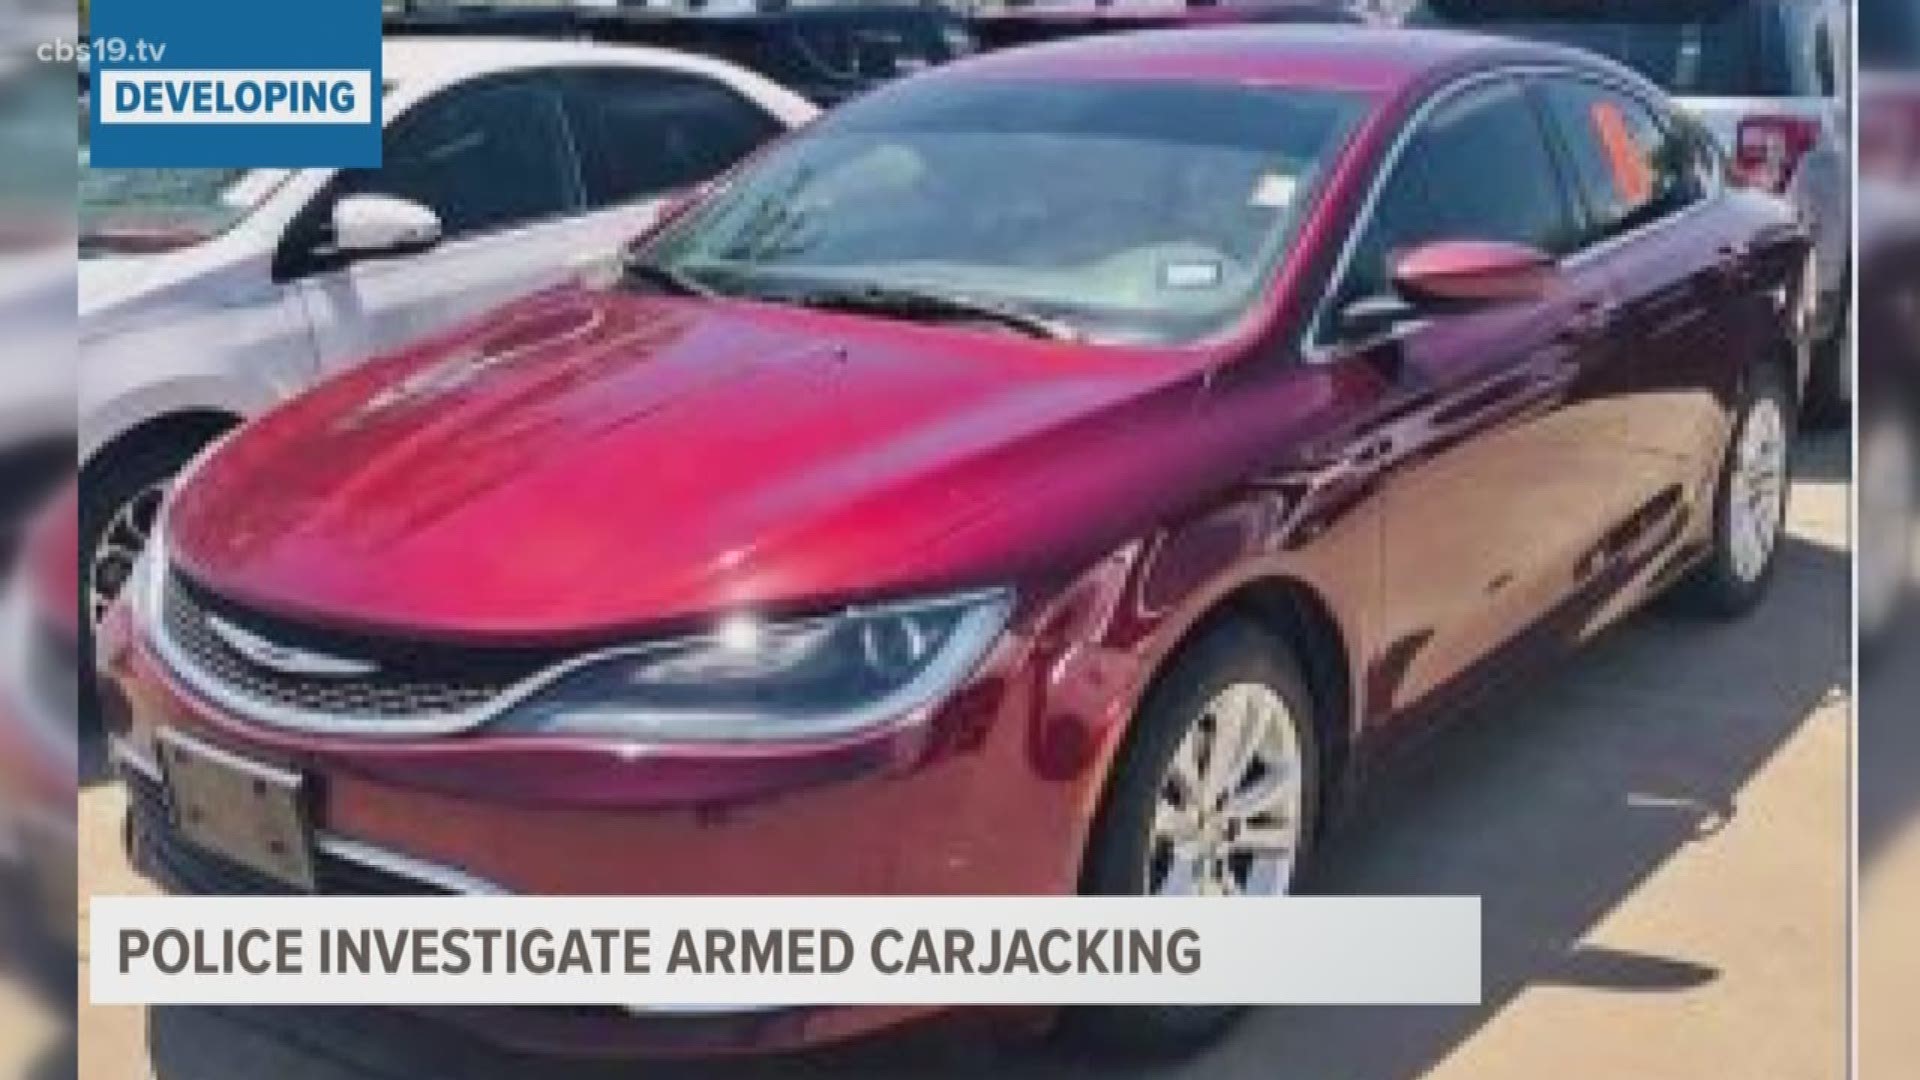 Police say the stolen car is a four-door 2016 Maroon Chrysler 200 with the license plate MLJ-4674.